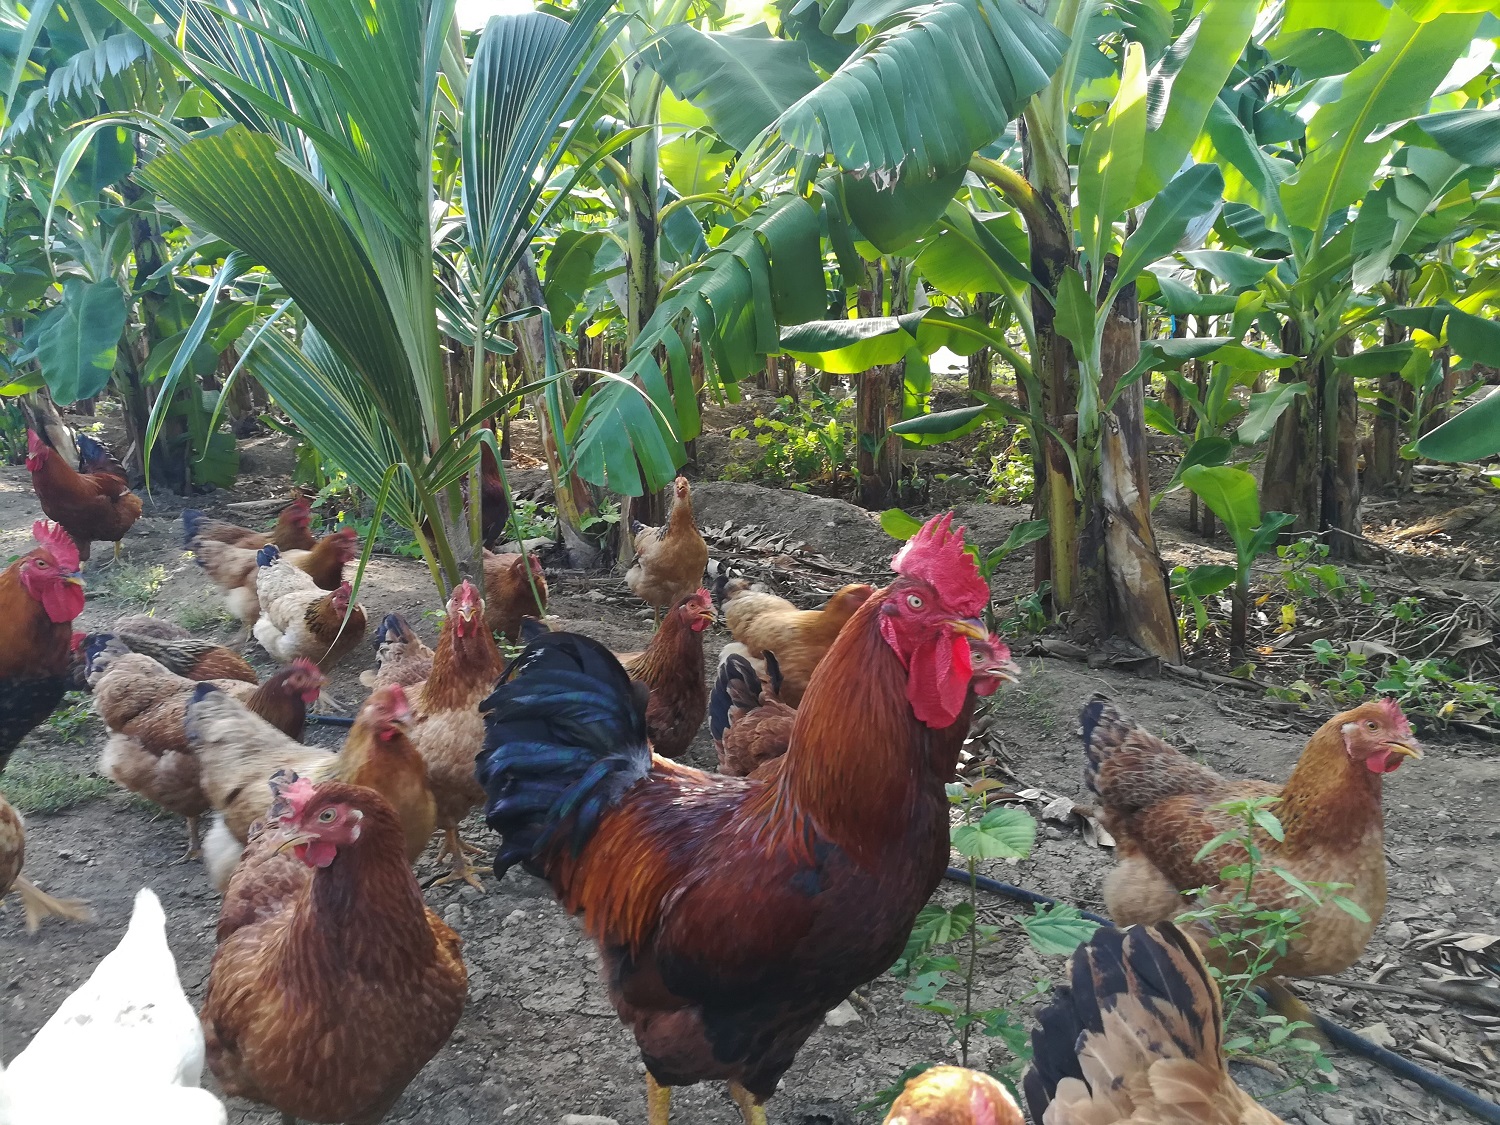 Running chickens to graze amongst bananas as a form of weed management